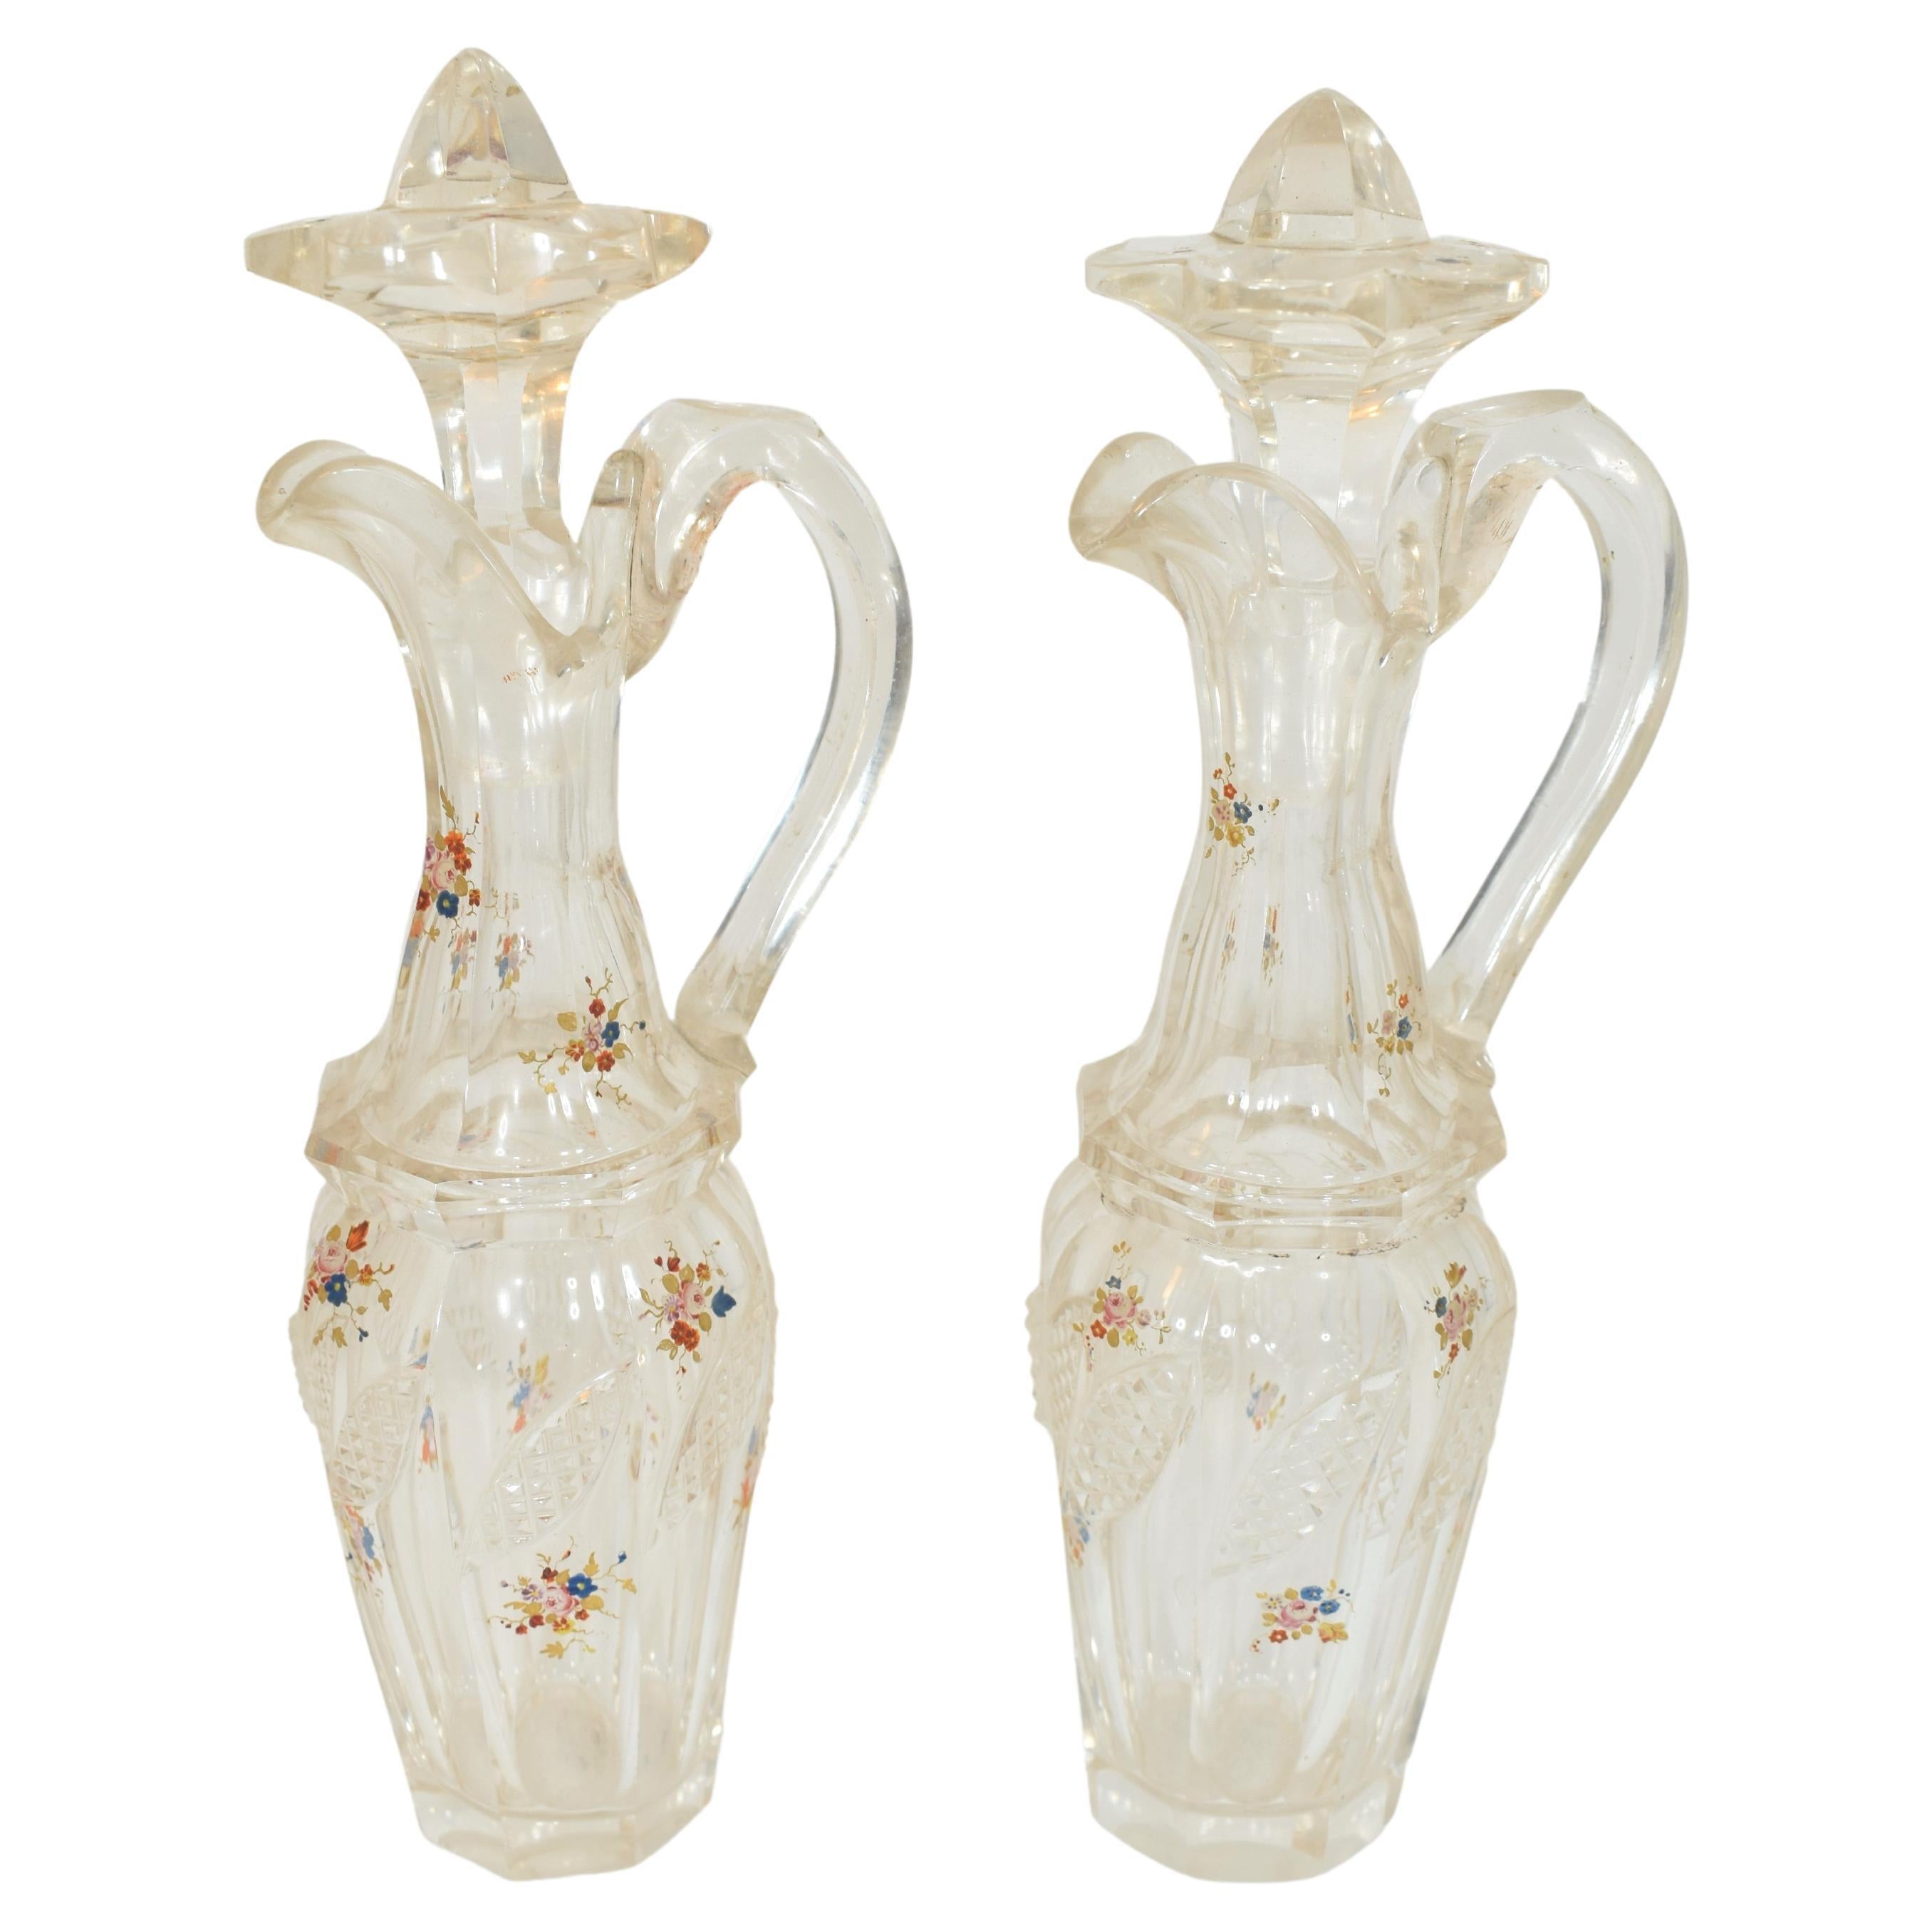 Antique Cut Glass and Metal Oil and Veniger Cruet Set, 19th Century For Sale 1